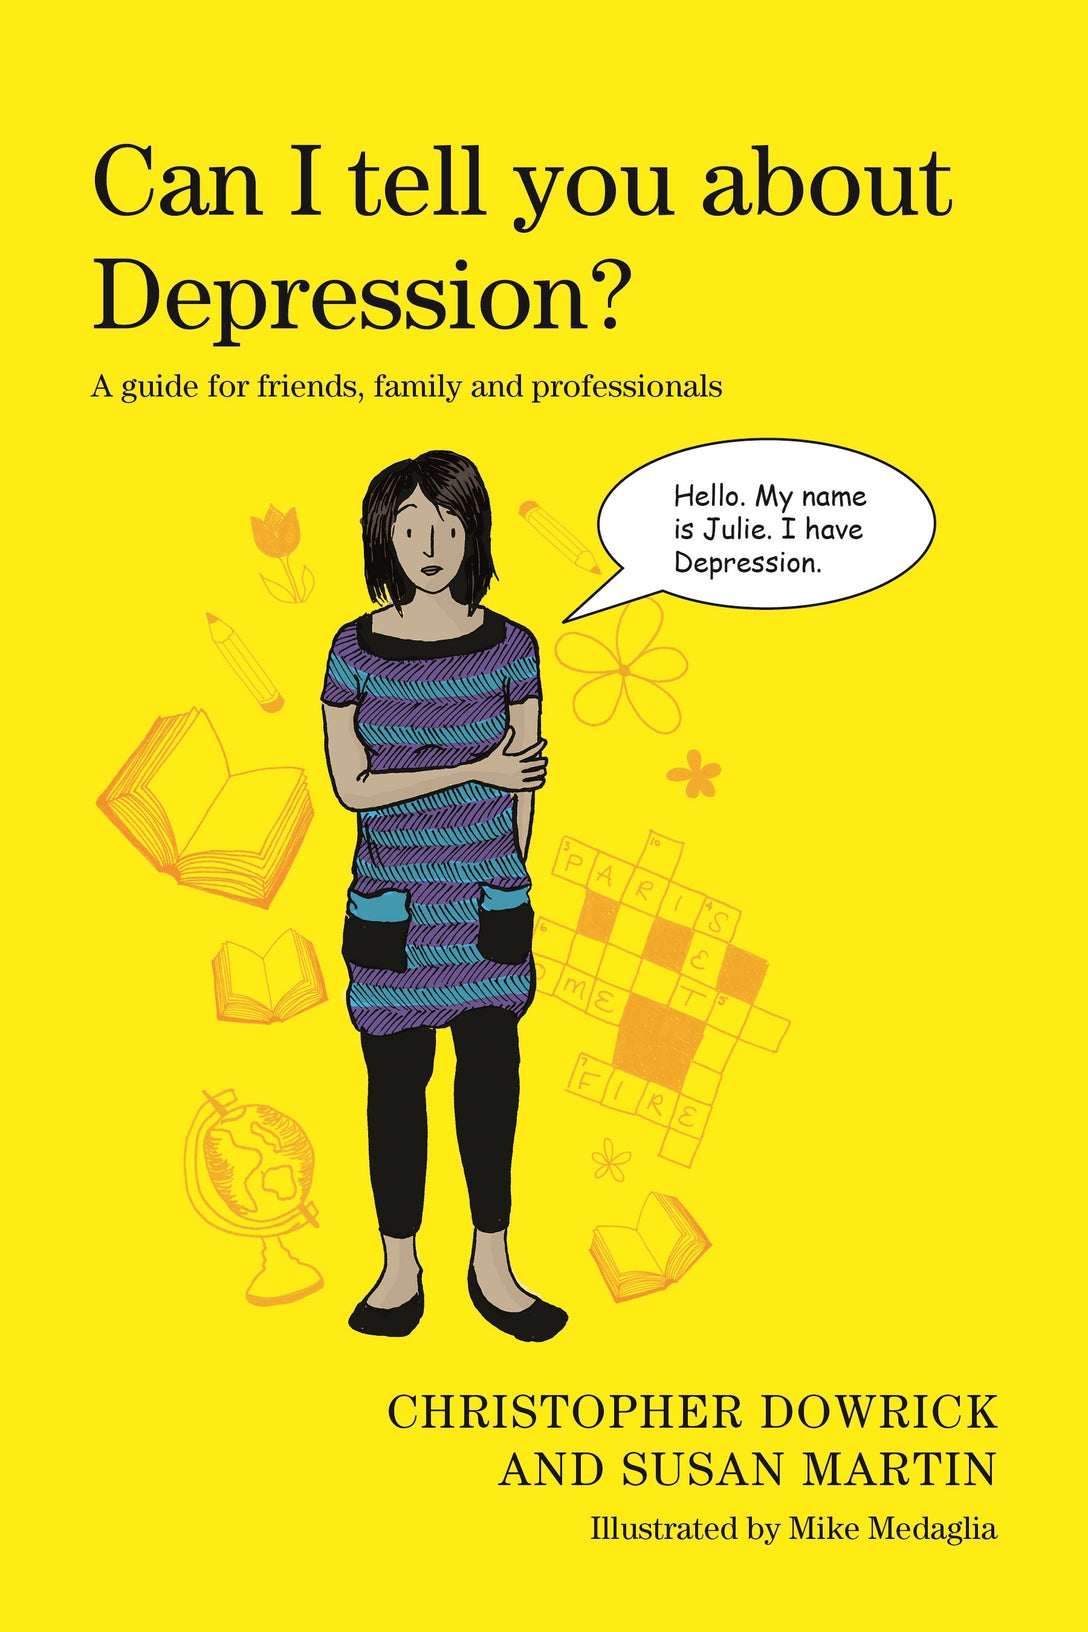 Can I tell you about Depression? by Christopher Dowrick, Susan Martin, Mike Medaglia